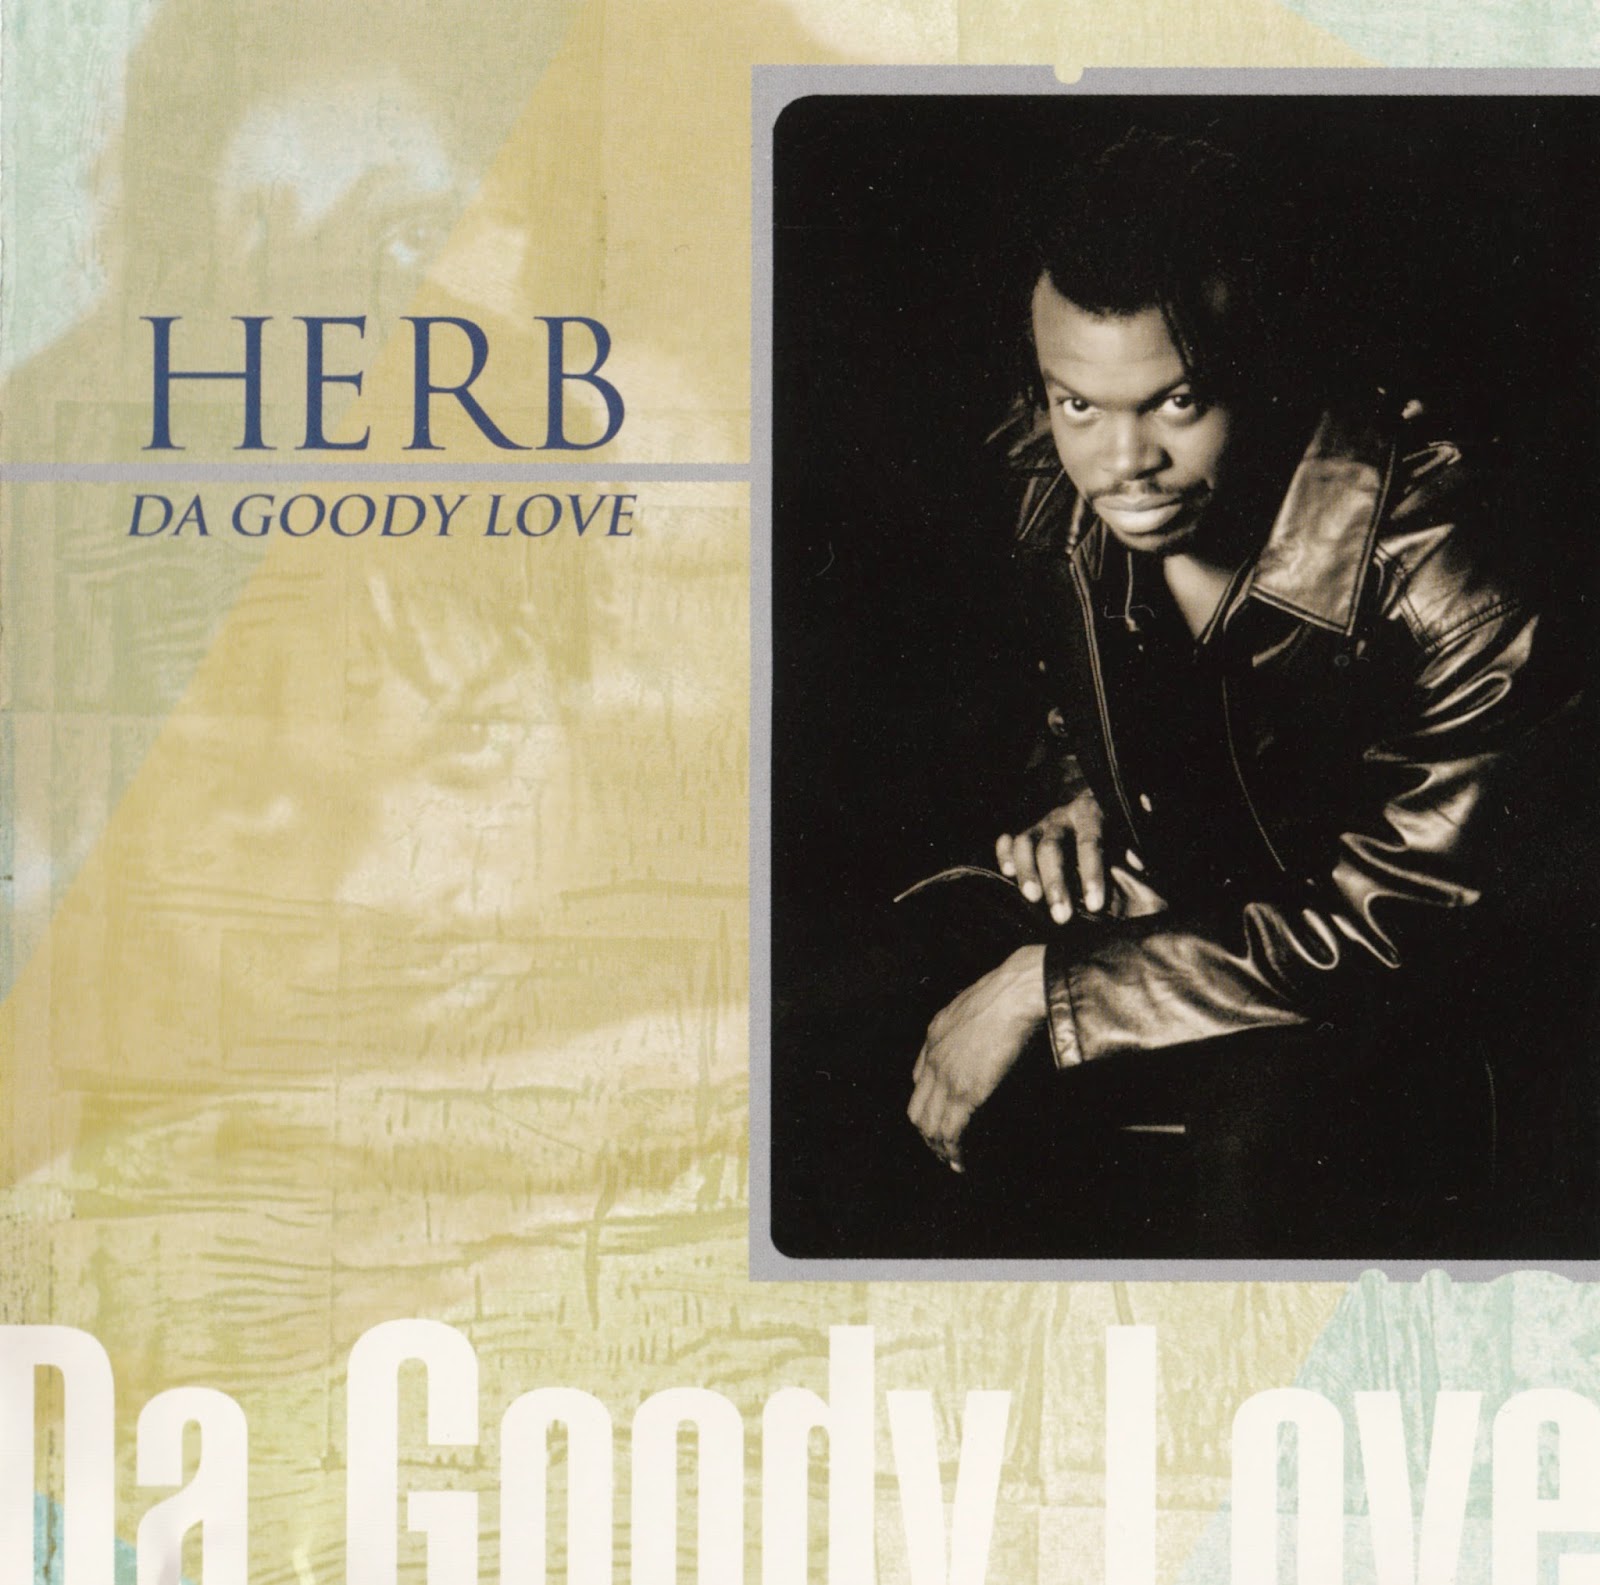 The best of good love gone